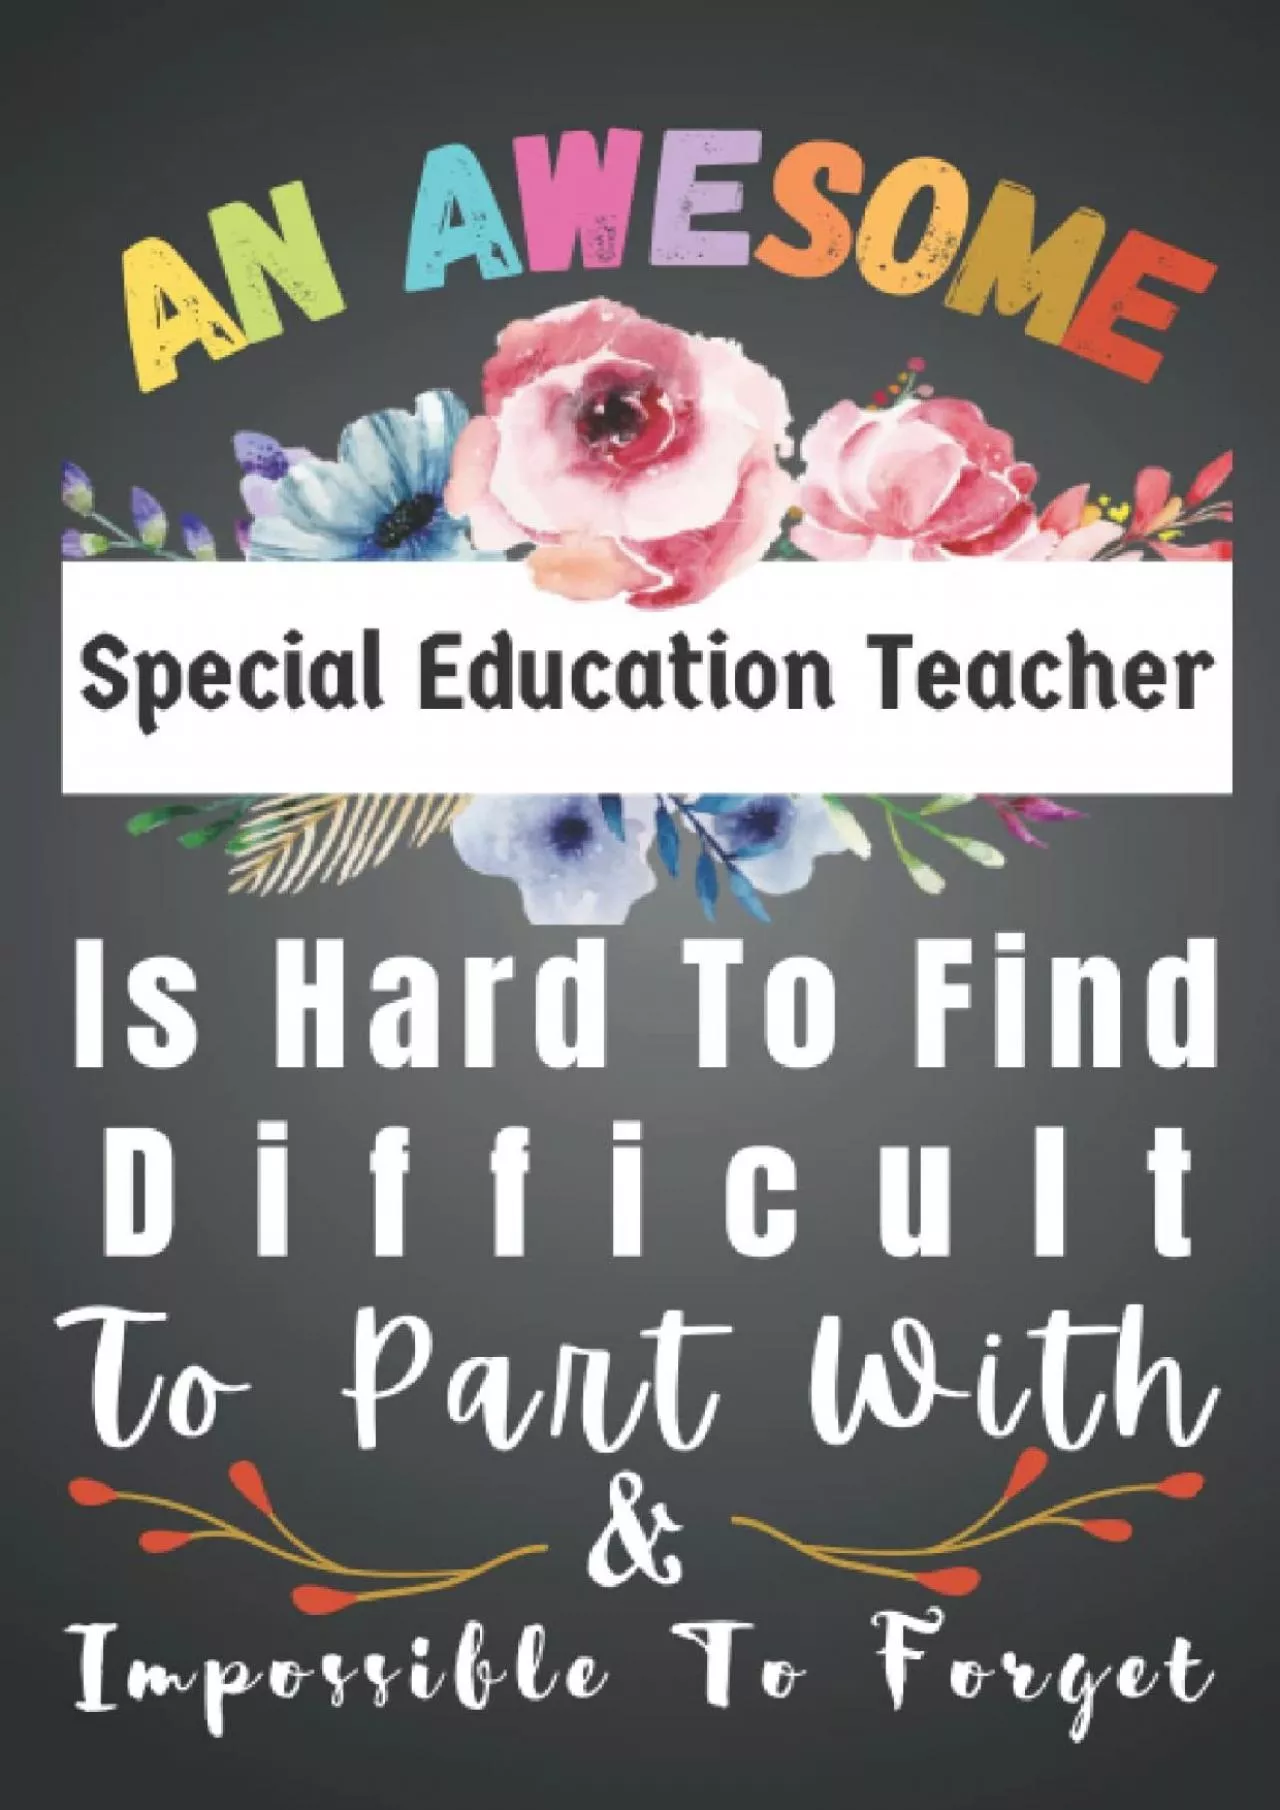 [DOWNLOAD] Special Education Teacher Gift: Awesome ~ Hard To Find ~ Forget: Teacher Appreciation